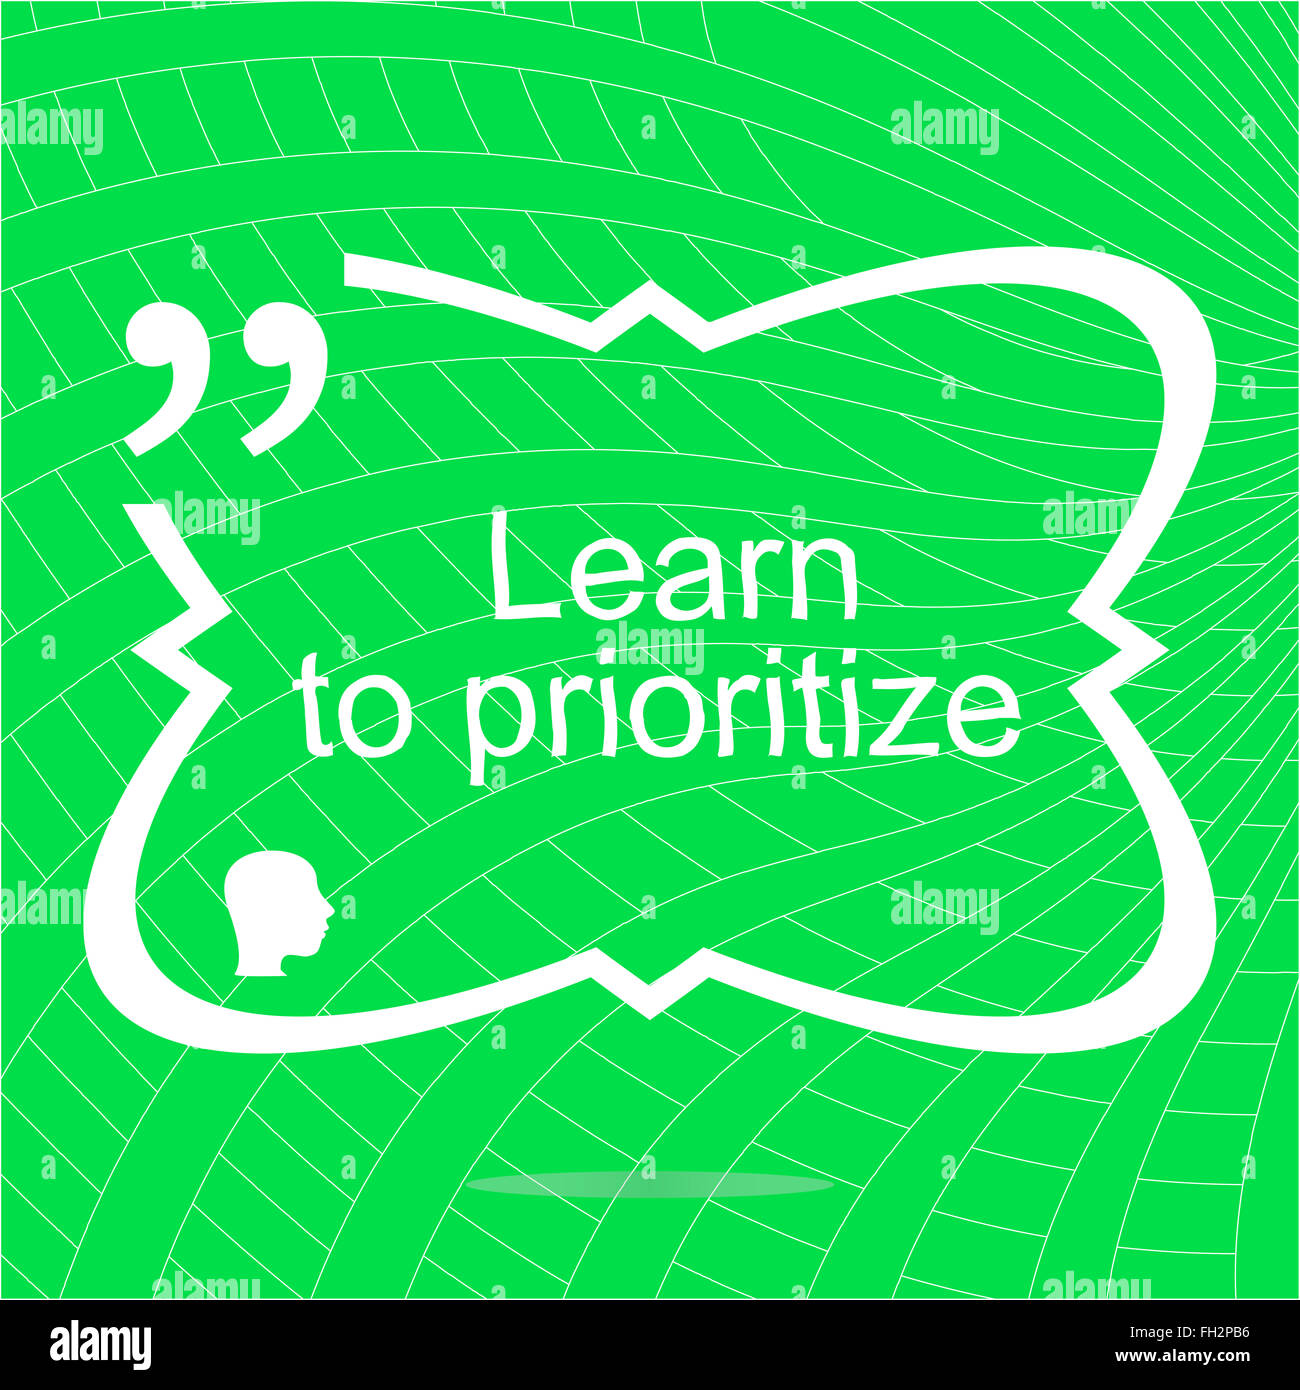 Learn to prioritize. Inspirational motivational quote. Simple trendy design. Positive quote Stock Photo